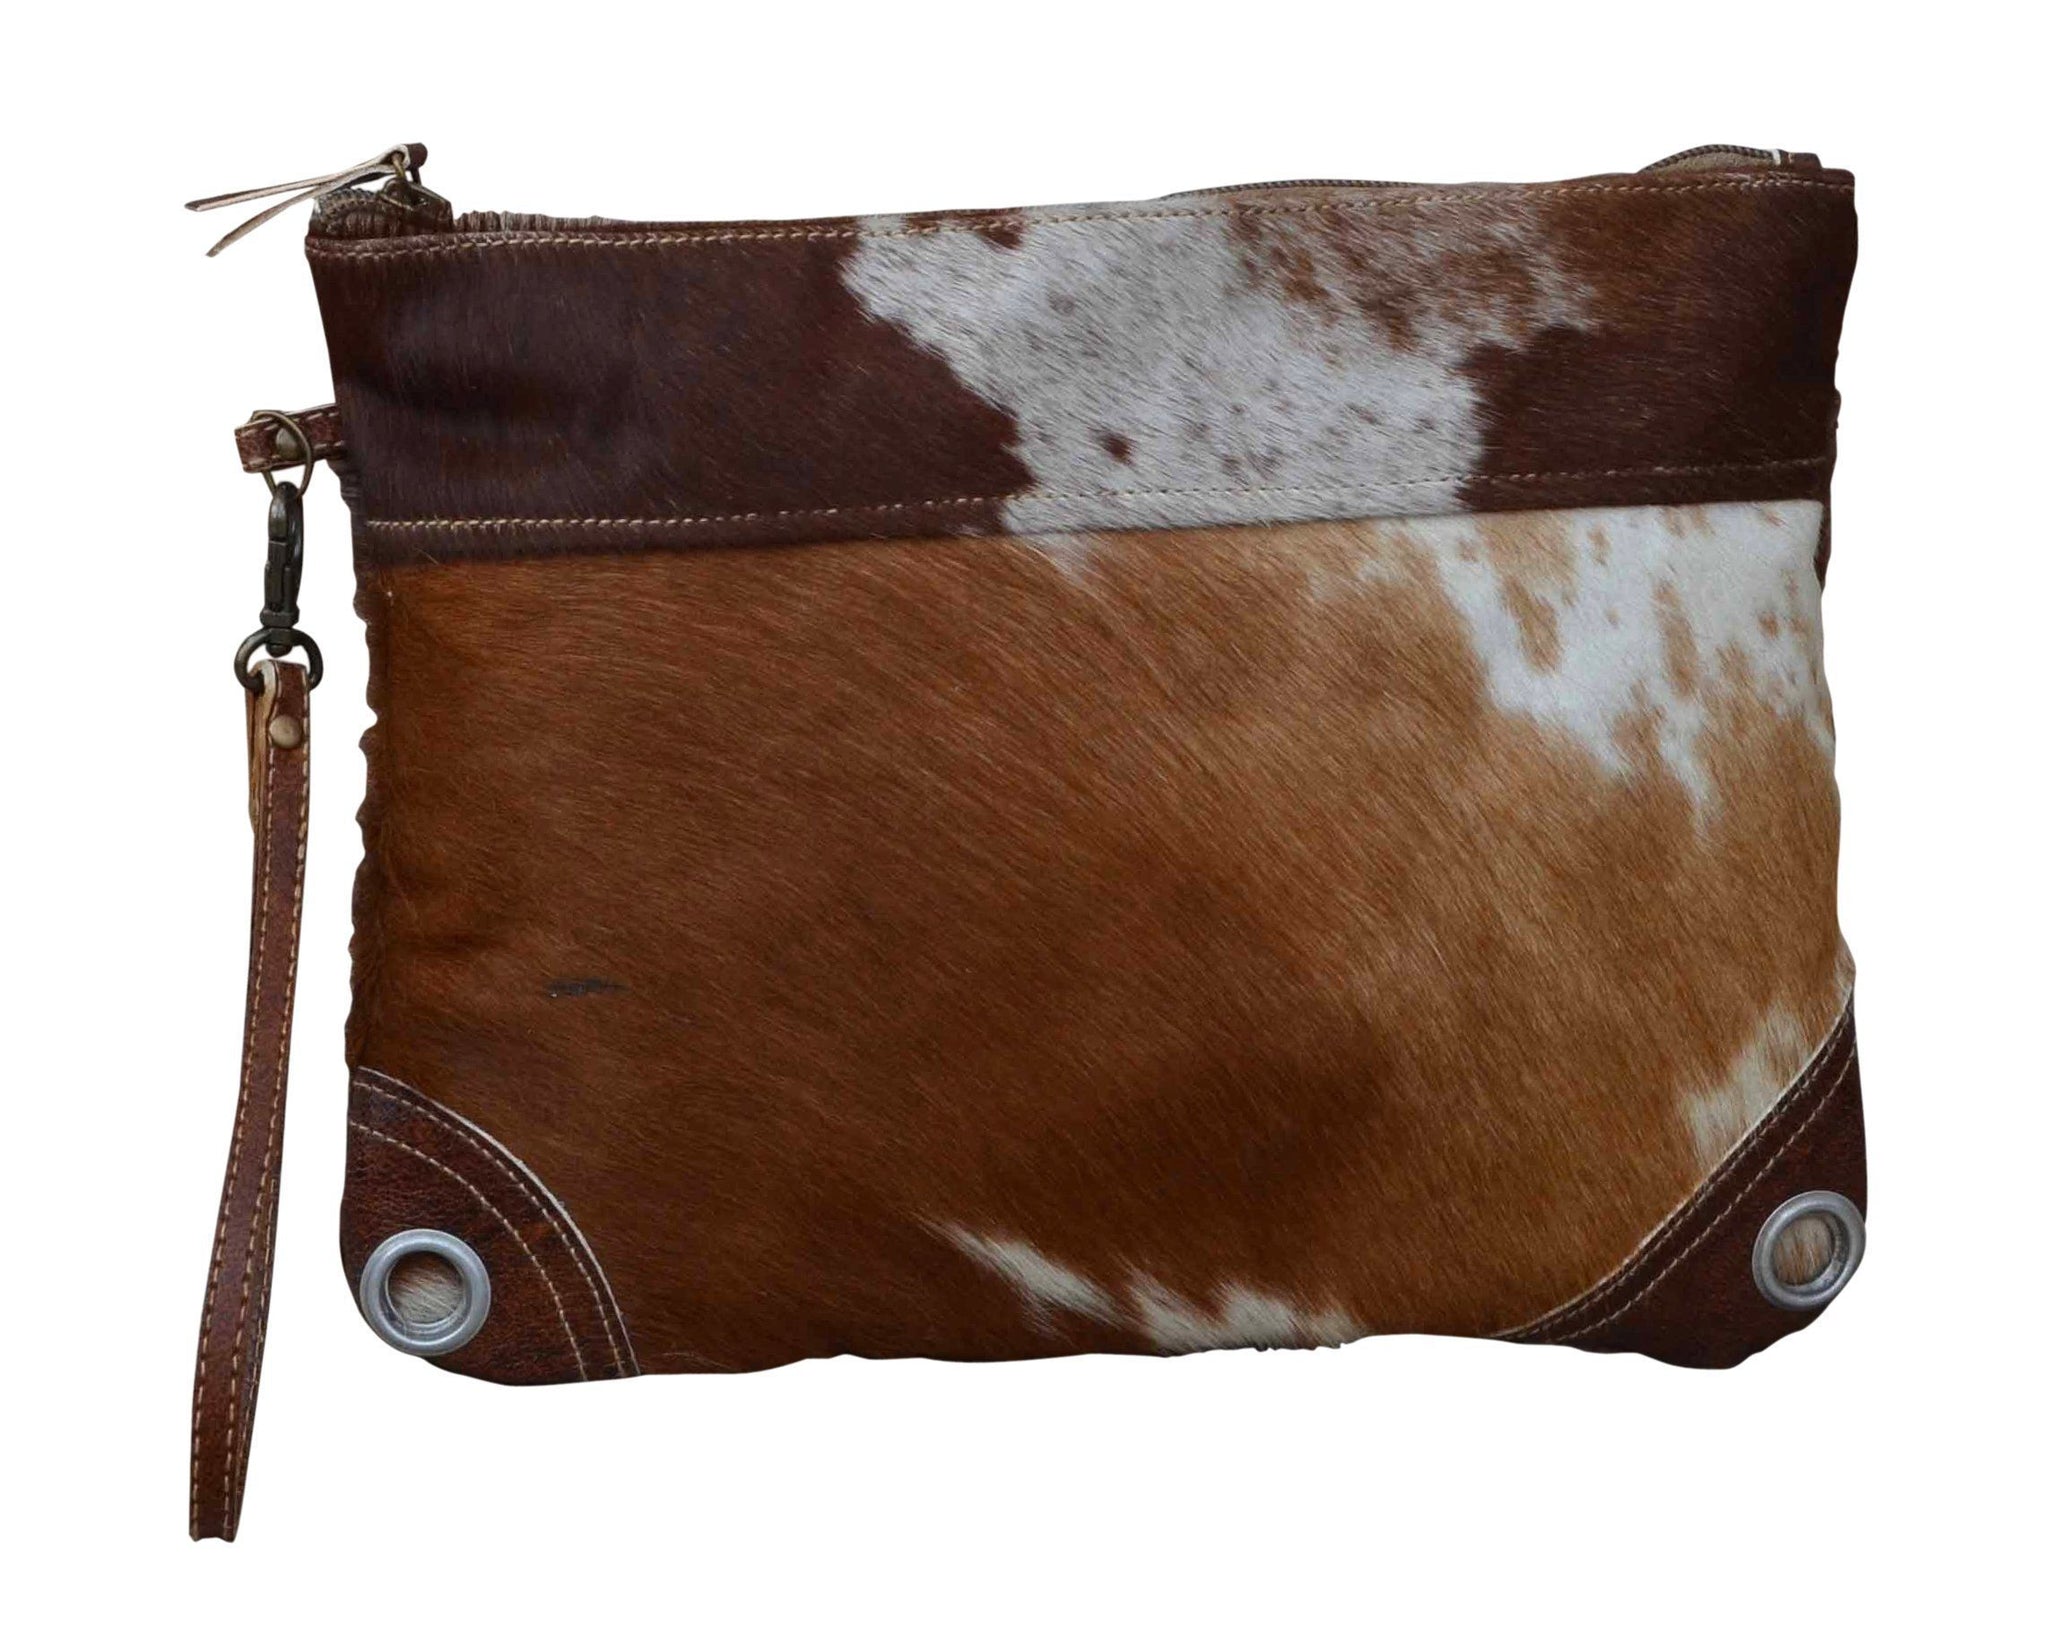 Cowhide Leather Tote Bag Australia - Backpack - Cow Hide Crafts